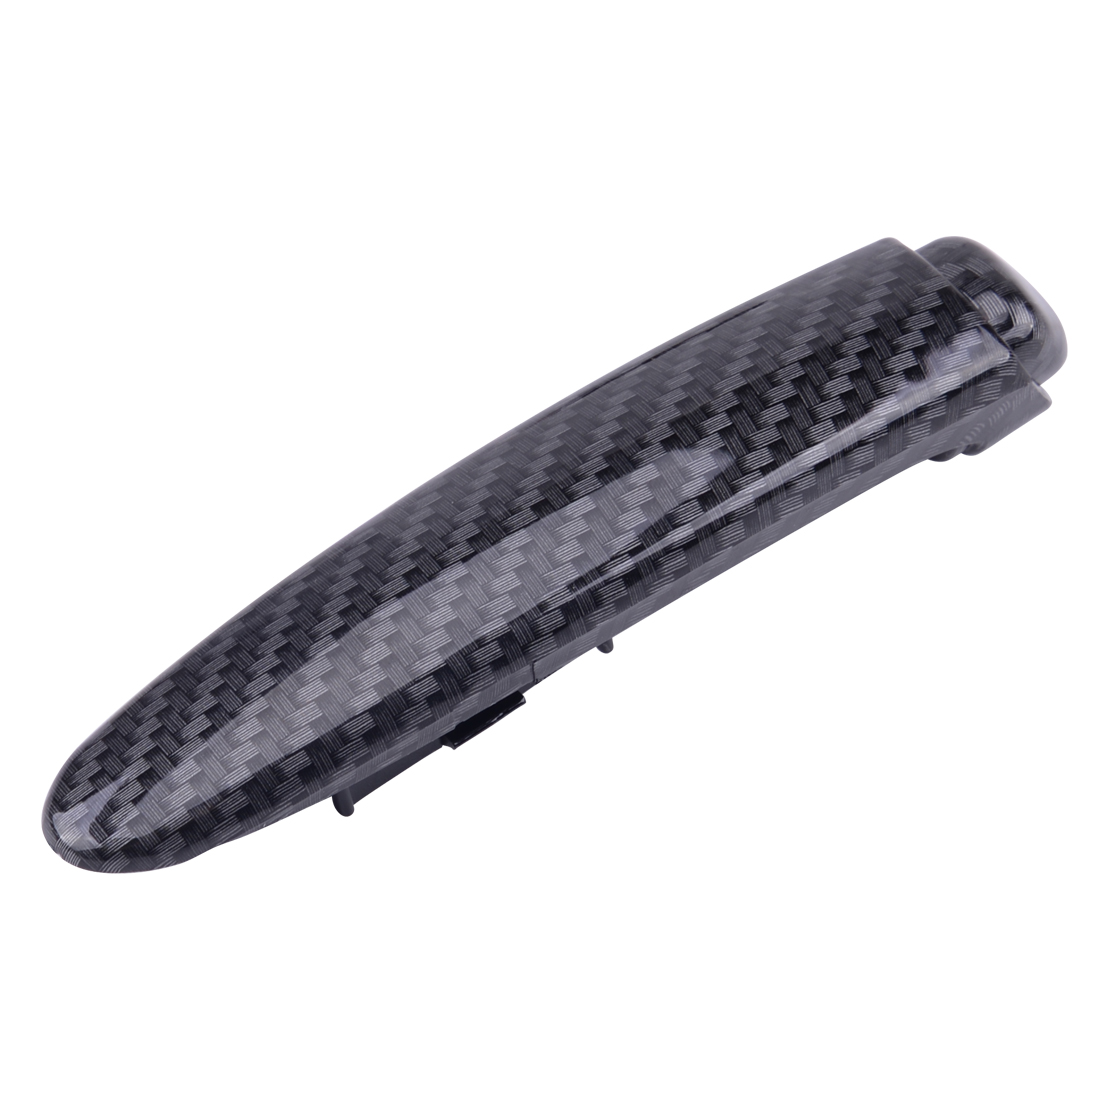 47115-SNA-A82Z 47115SNAA82Z Carbon Fiber Style Hand Brake Handle Cover Protect Stick Fit for Honda Civic 2006-2011